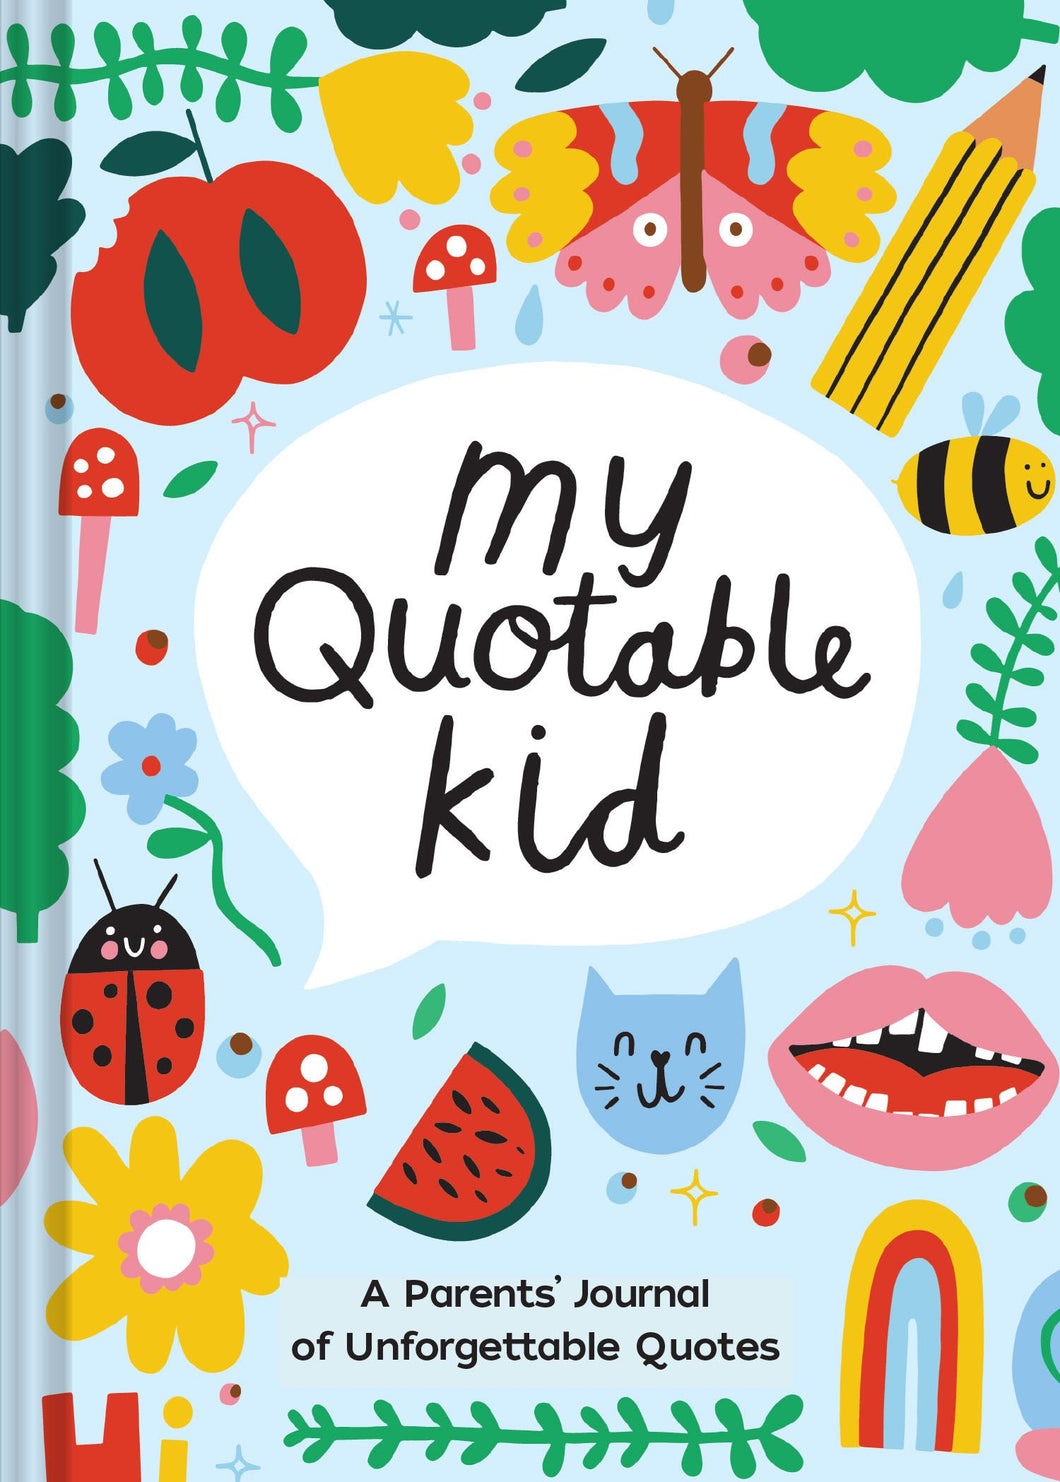 Book cover is blue with colourful simple illustrations of insects, fruit, and plants. Tagline reads 'A parents' journal of unforgettable quotes'.